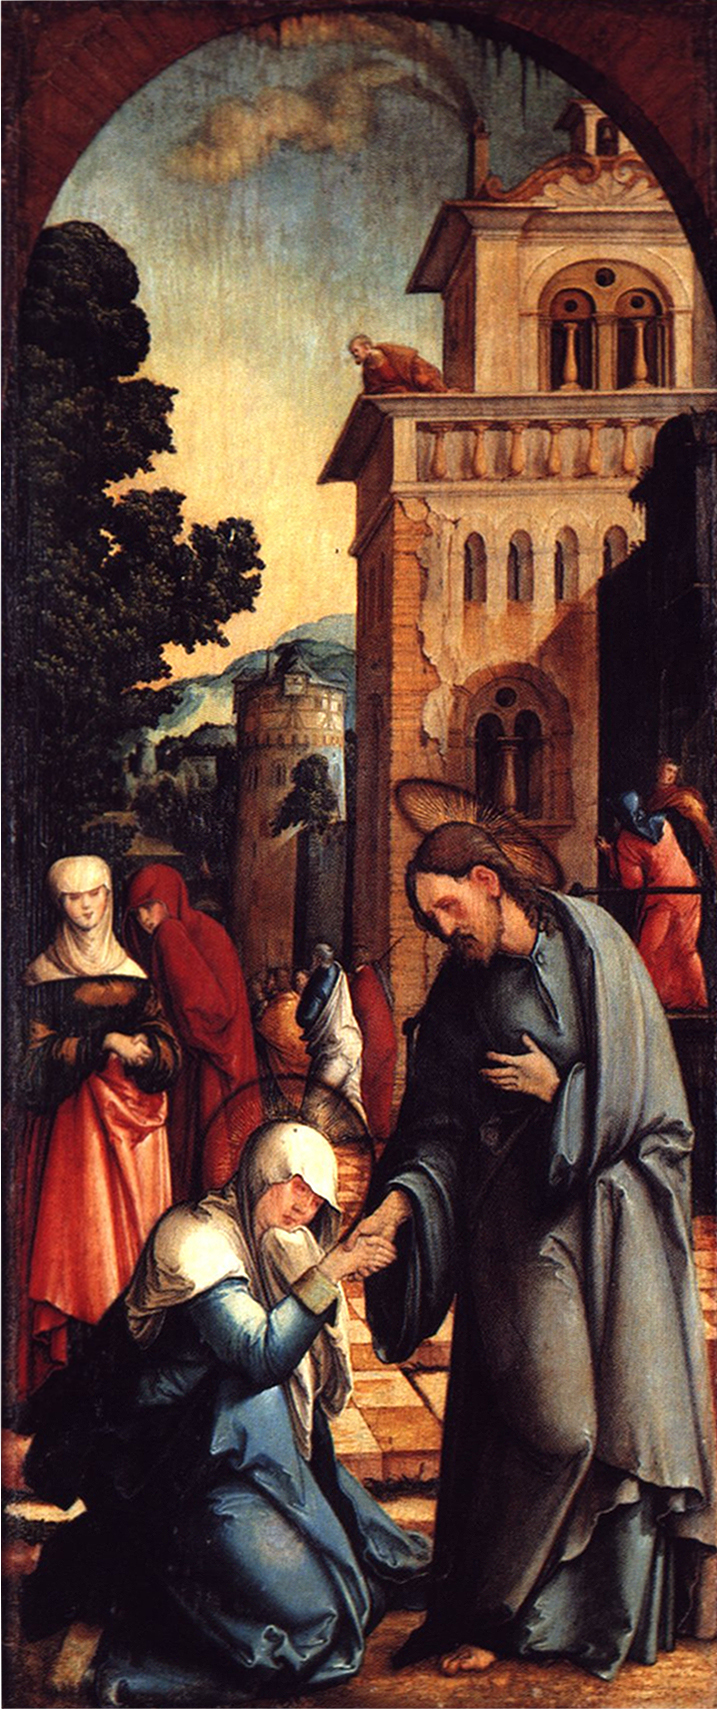 Christ taking leave of his Mother - Wikipedia